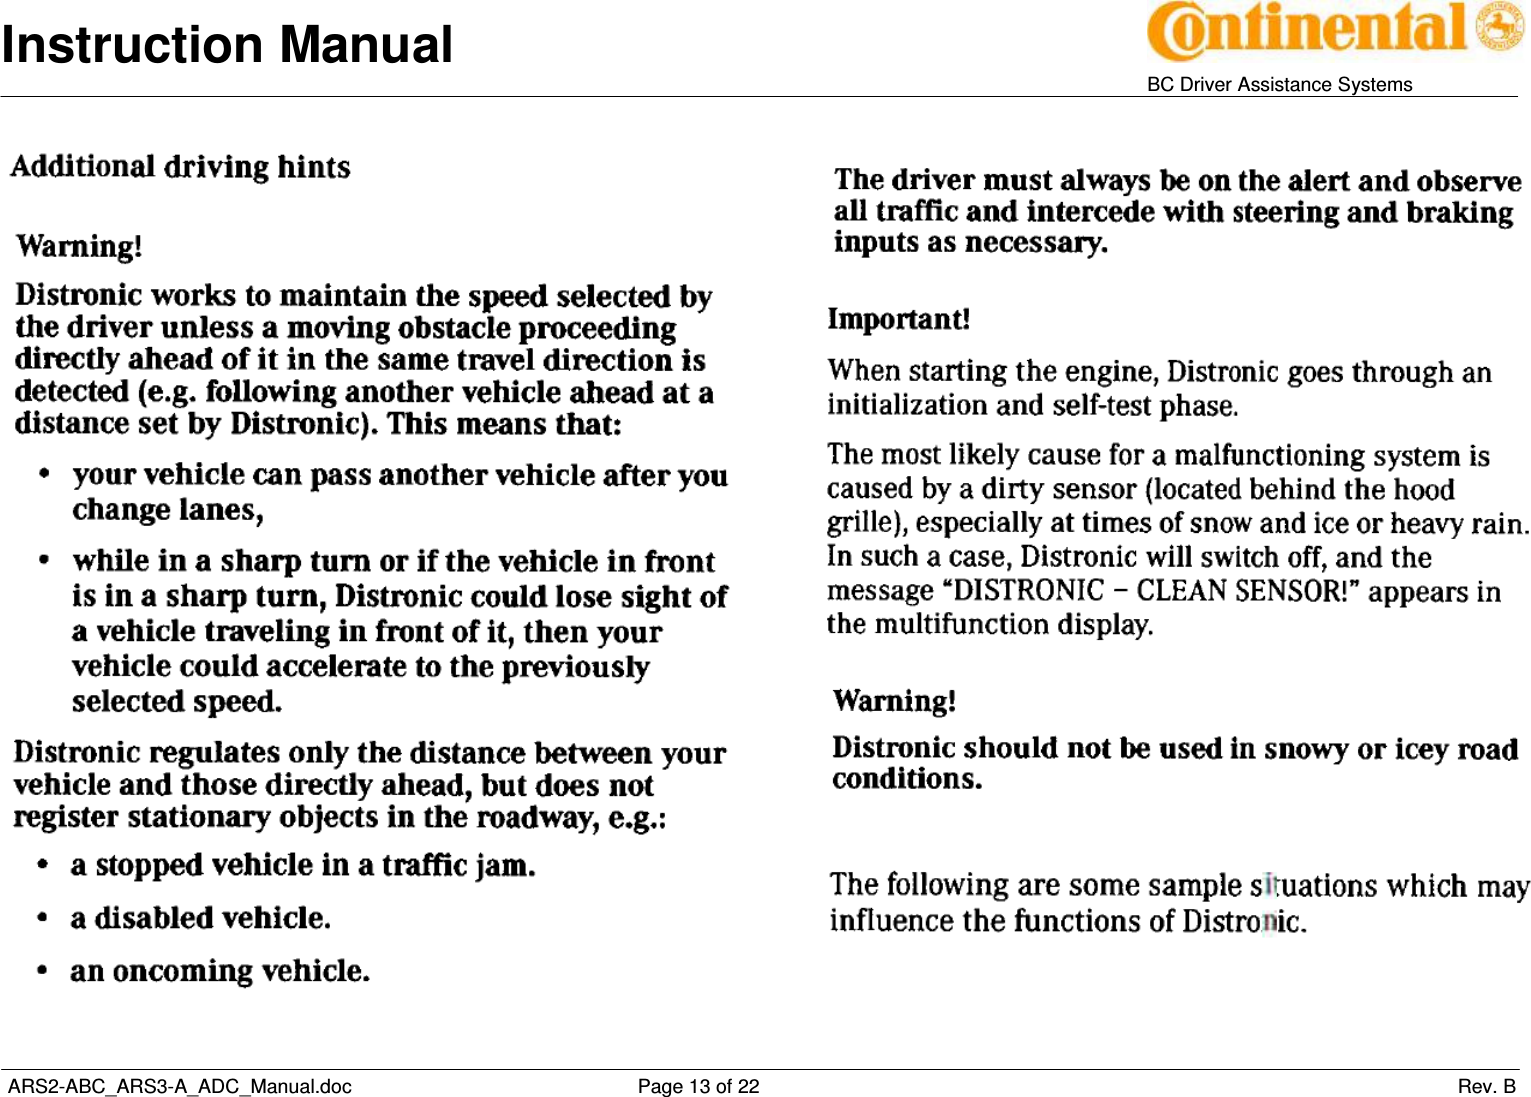 Instruction Manual   BC Driver Assistance Systems  ARS2-ABC_ARS3-A_ADC_Manual.doc     Page 13 of 22                 Rev. B      